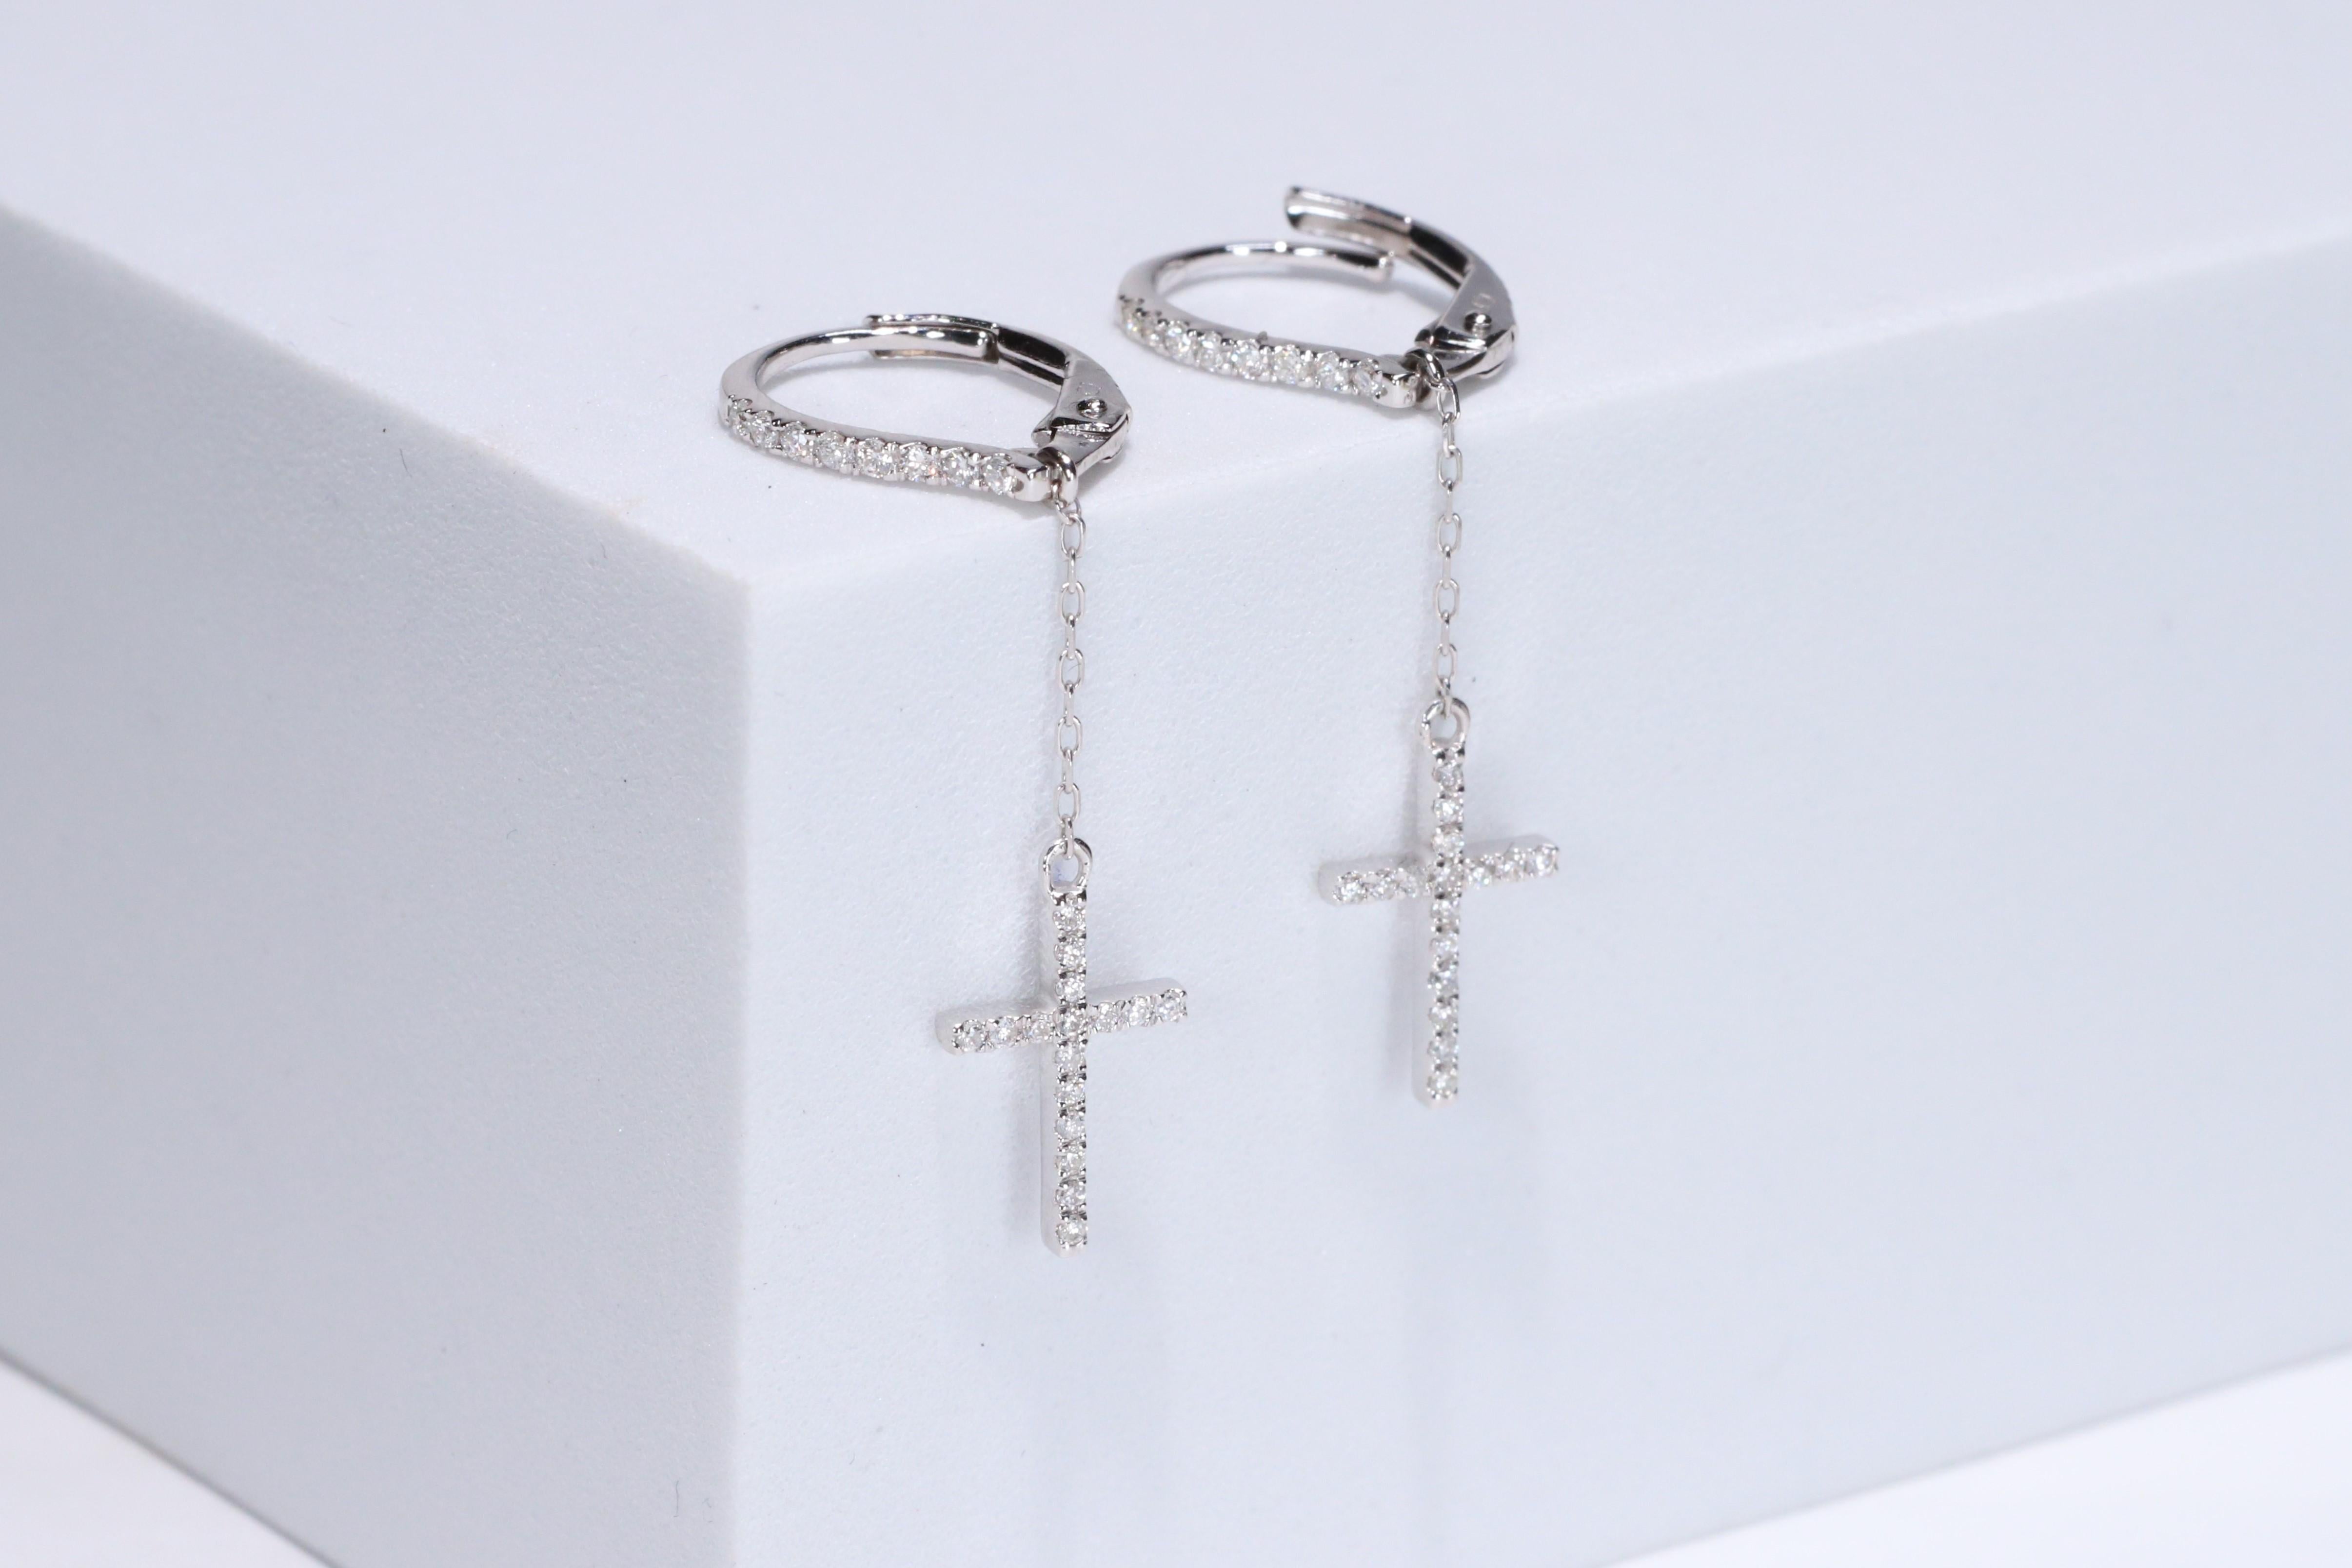 Each of these pretty earrings from Gin & Grace features a on a lever back clasp adorned with white diamonds. These earrings are made of rich 14-karat White gold with a high polish. Diamonds: 48 pcs Diamond cut: Round Diamond weight: 0.22 carat